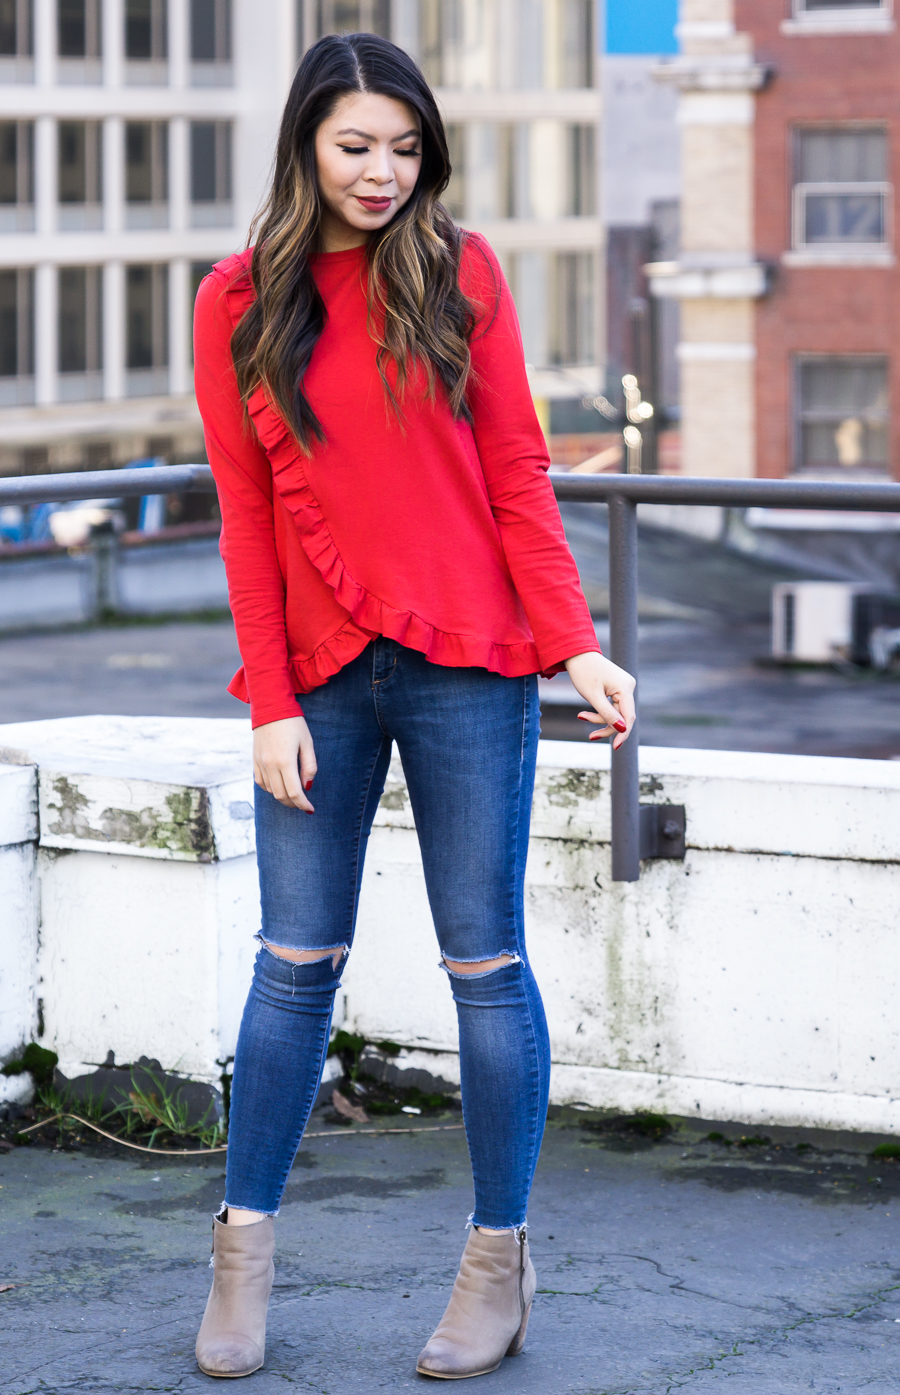 girlmeetsgold) red top outfit, valentine's day style, how to wear